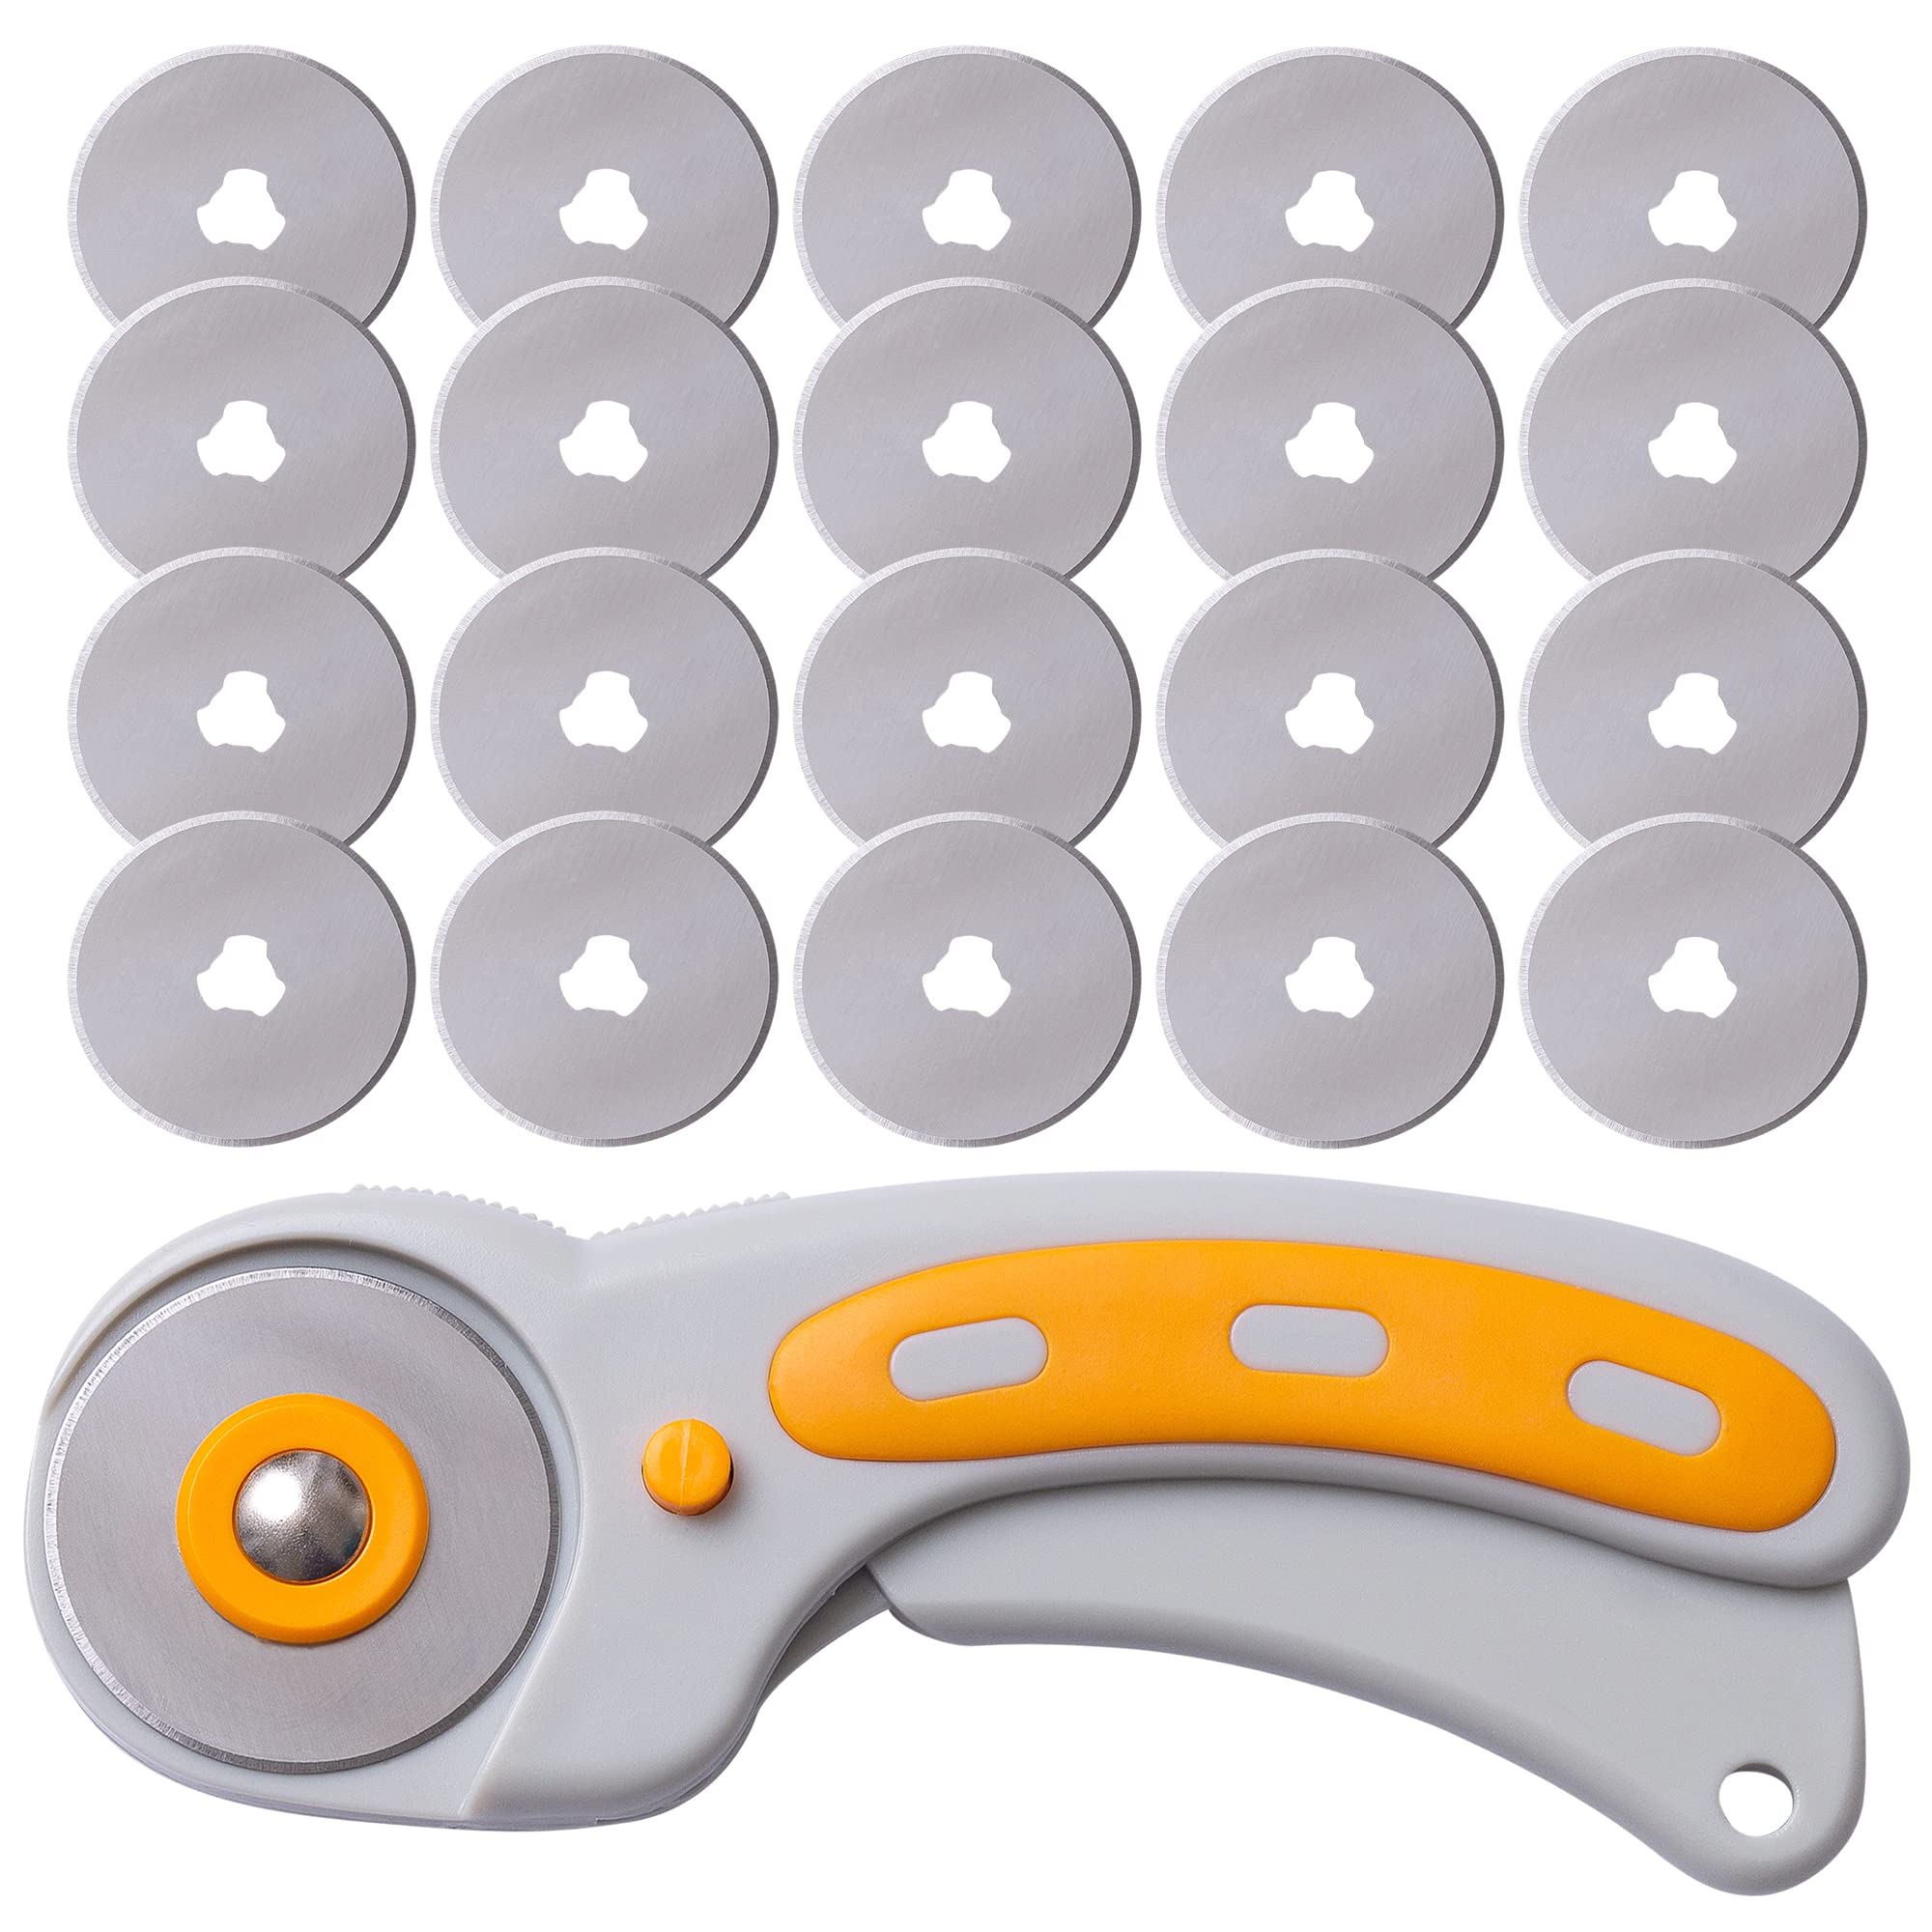 W.A. Portman WA Portman Rotary Cutter Set with Blades - 45mm Rotary Cutter with Safety Lock - 20 Extra SKS-7 Steel Rotary Fabric Cutter Blade